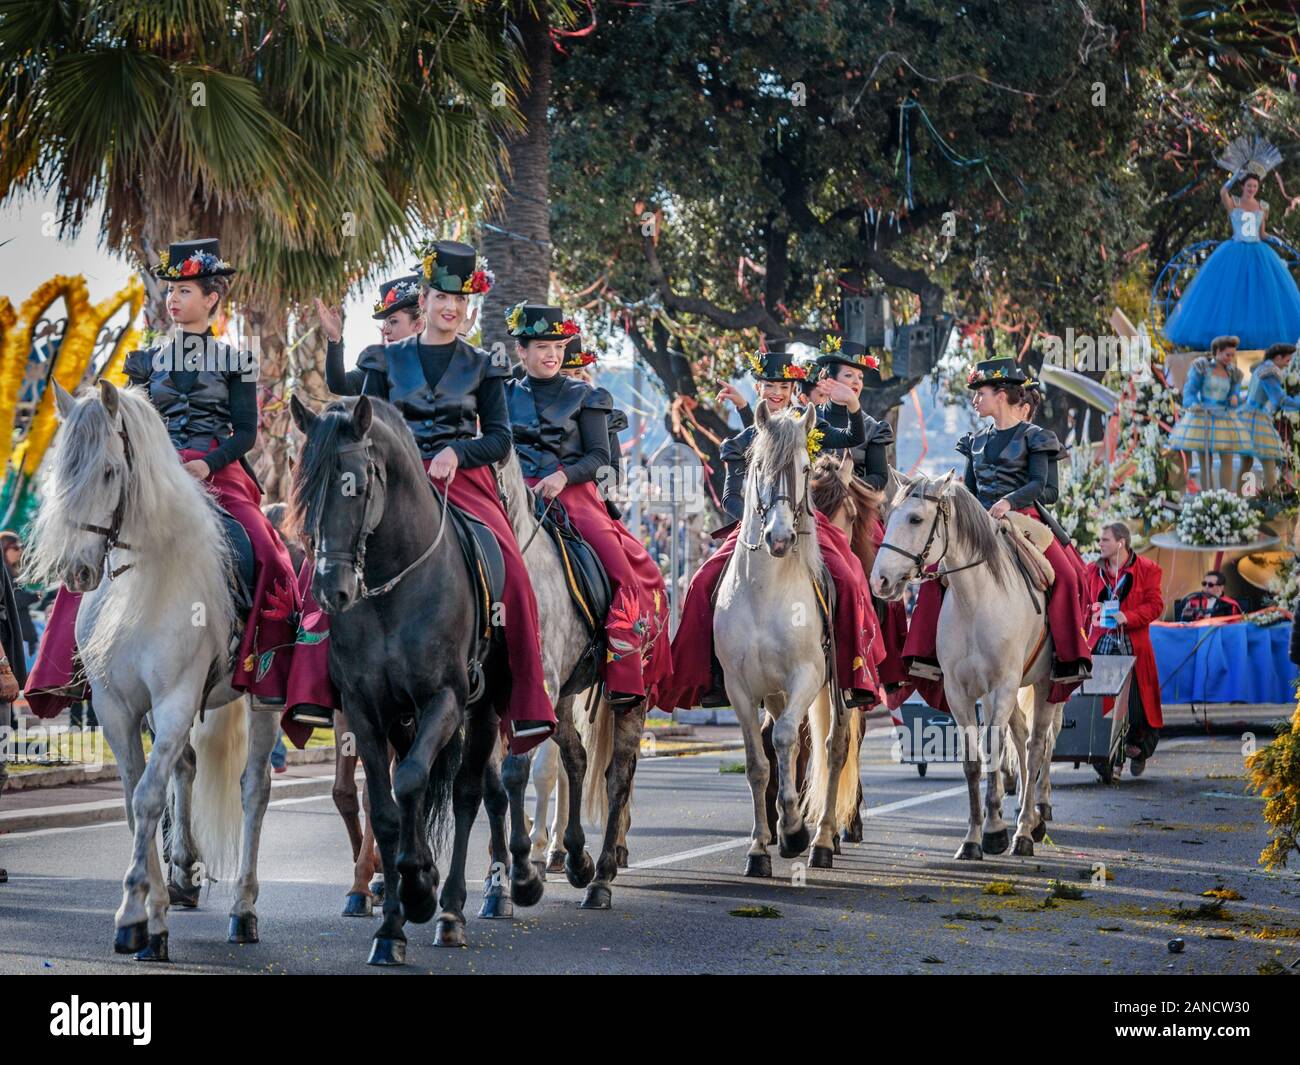 Horse riders at the Flower Parade, Nice Carnival, French Riviera, Cote d'Azur, France. Stock Photo